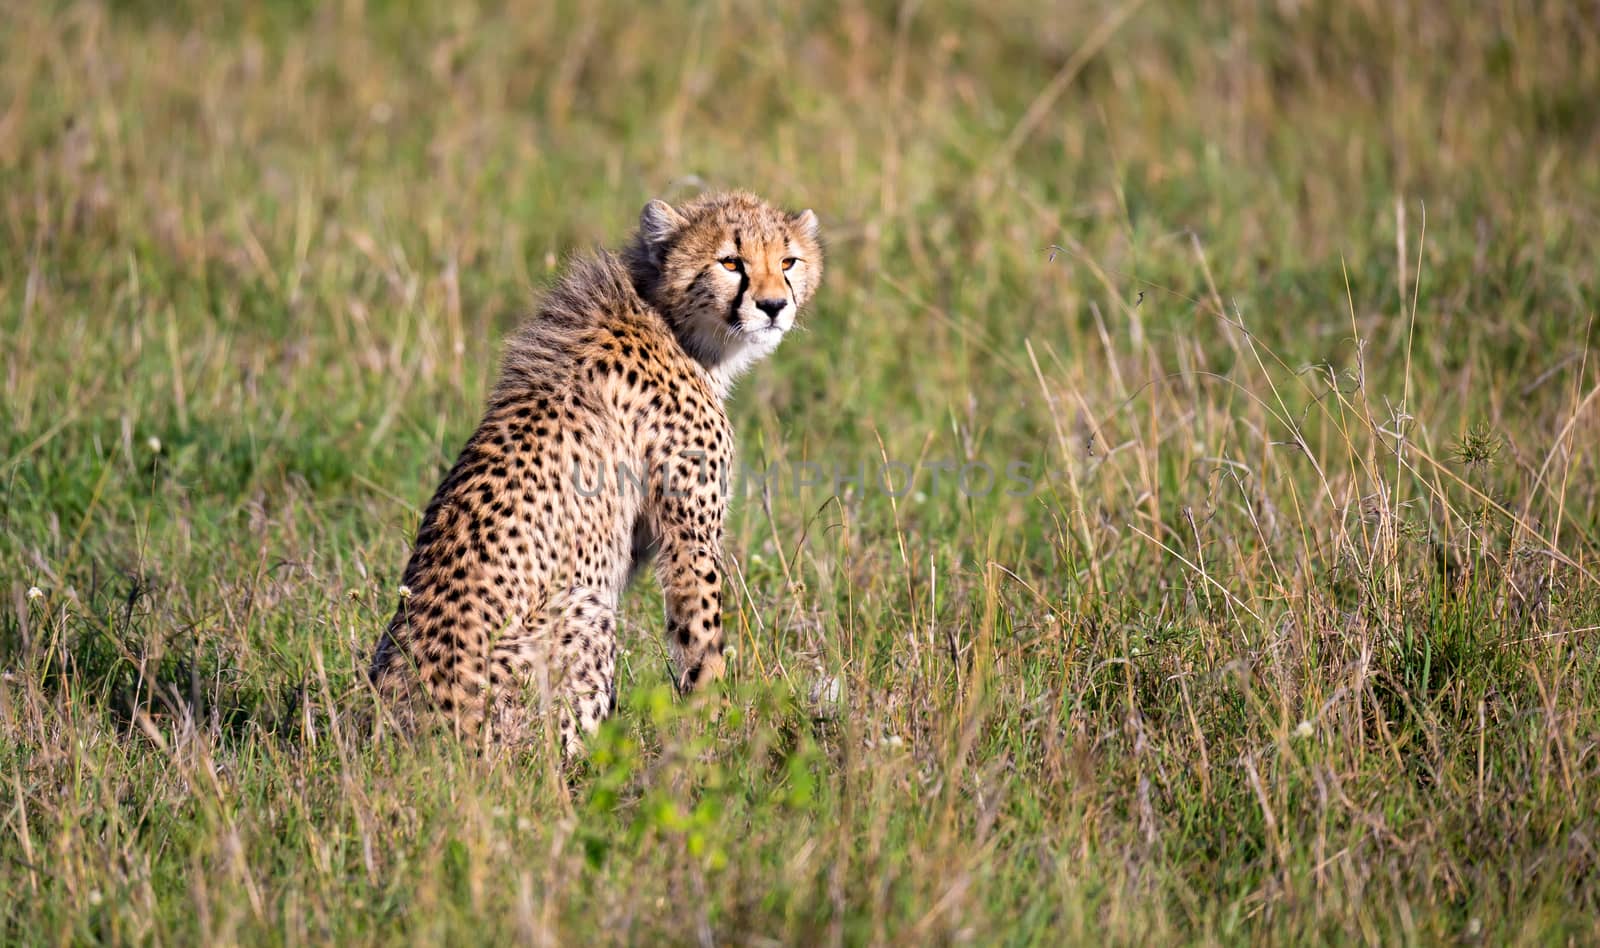 A cheetah sits in the grass landscape of the savanna of Kenya by 25ehaag6